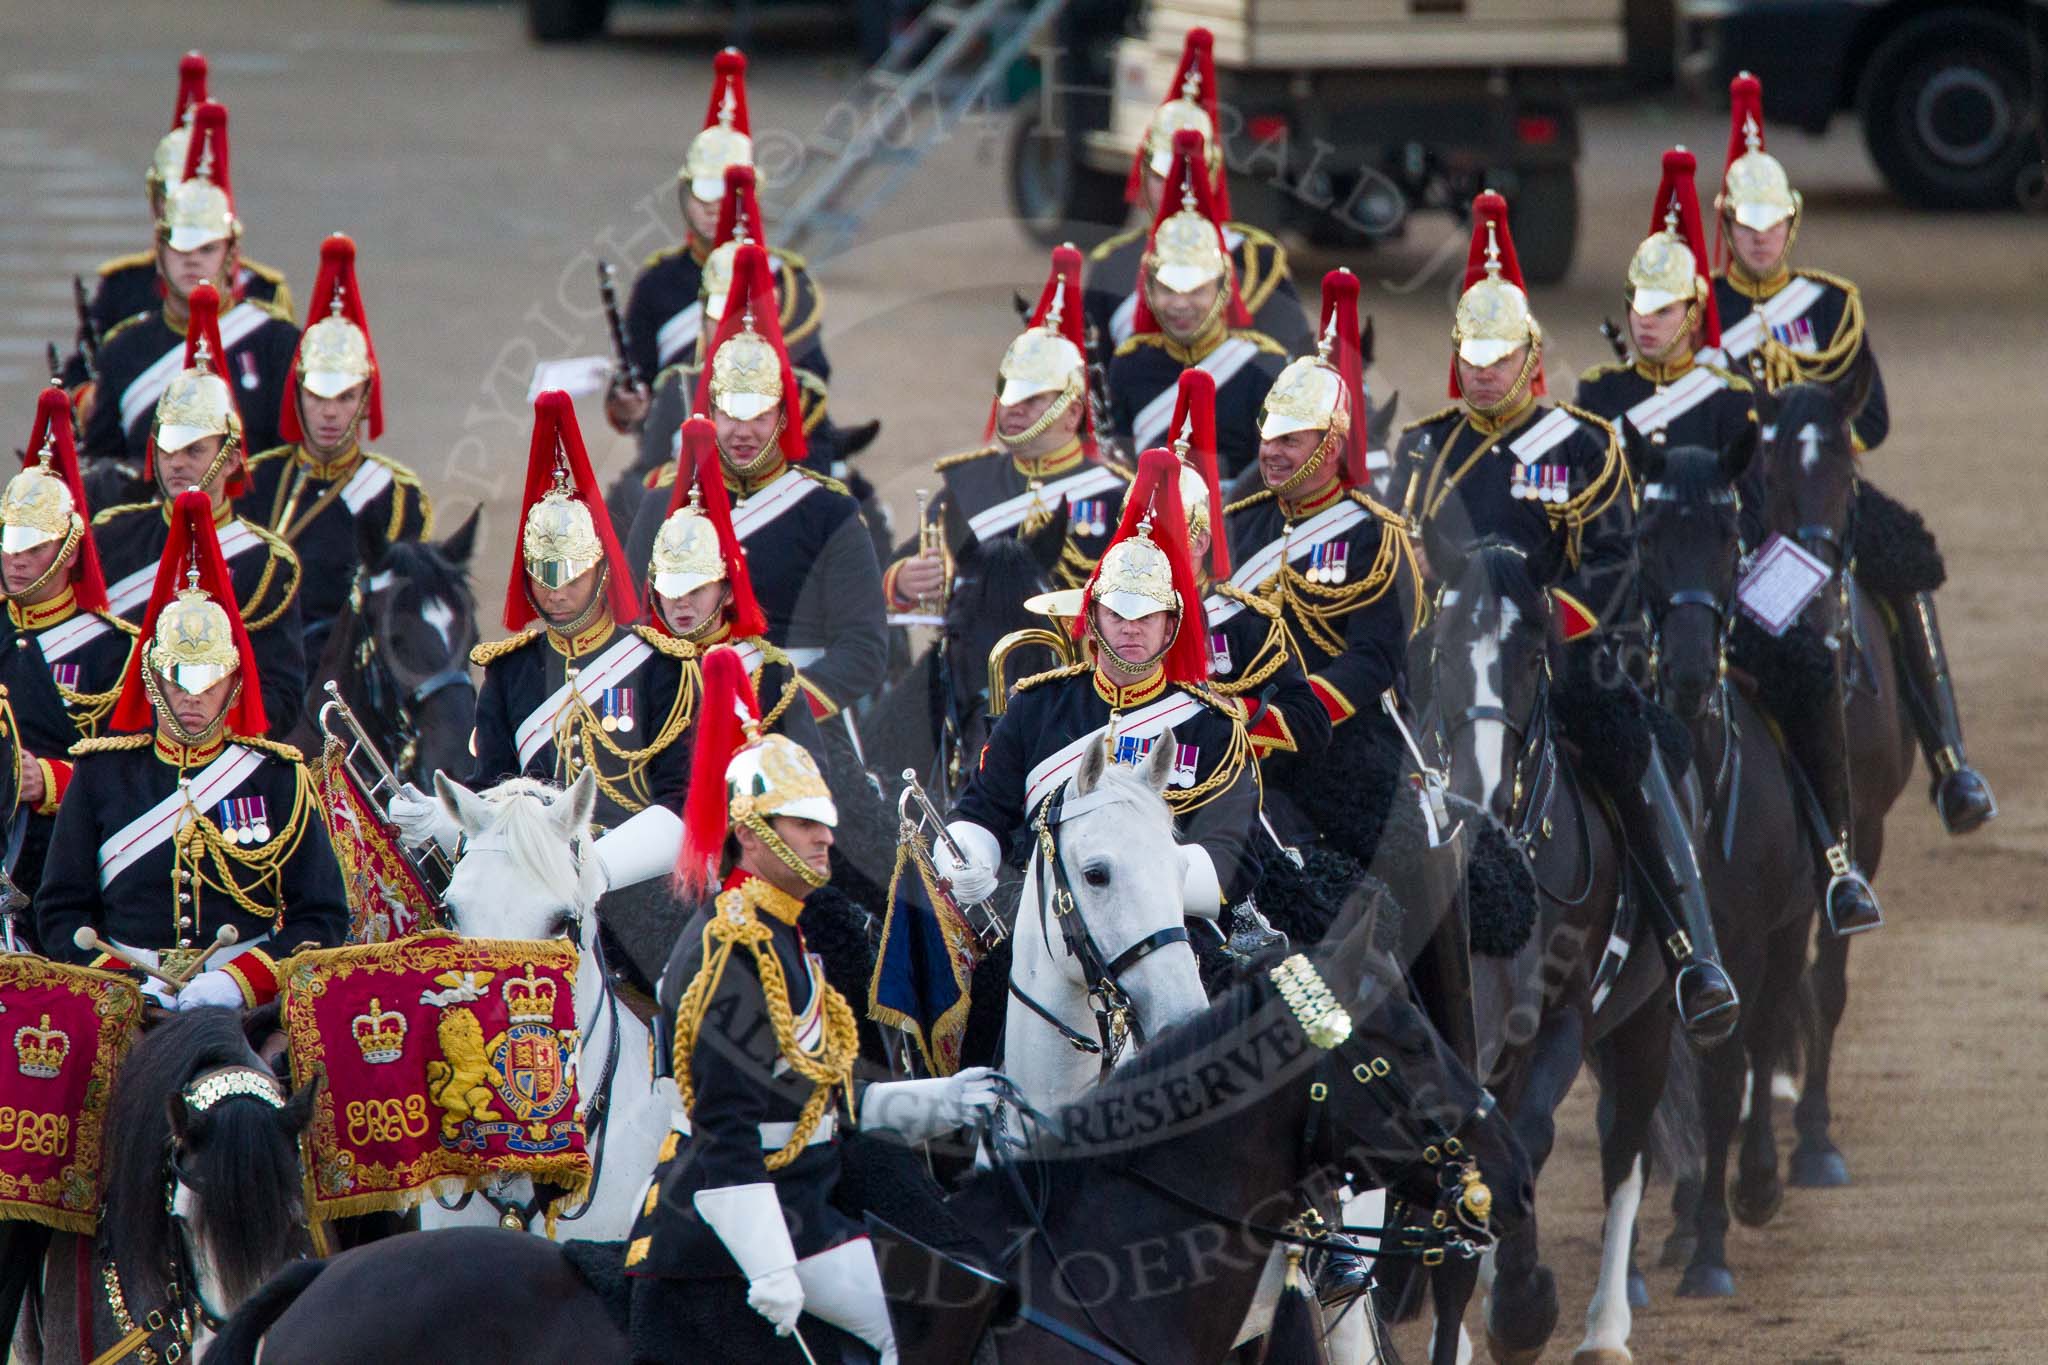 Beating Retreat 2014.
Horse Guards Parade, Westminster,
London SW1A,

United Kingdom,
on 11 June 2014 at 20:41, image #161